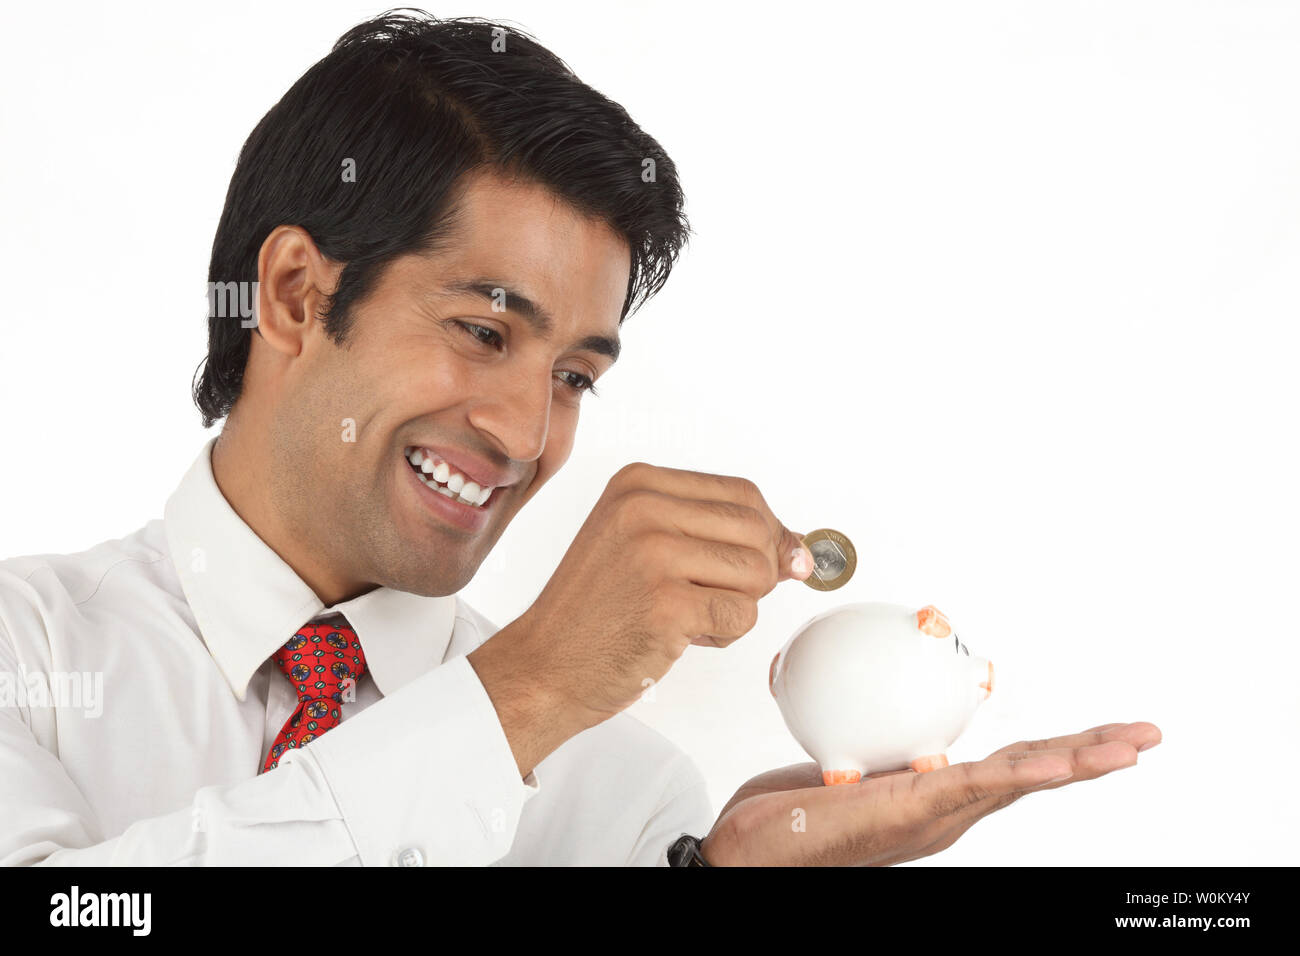 Indian businessman inserting a coin into a piggy bank Stock Photo